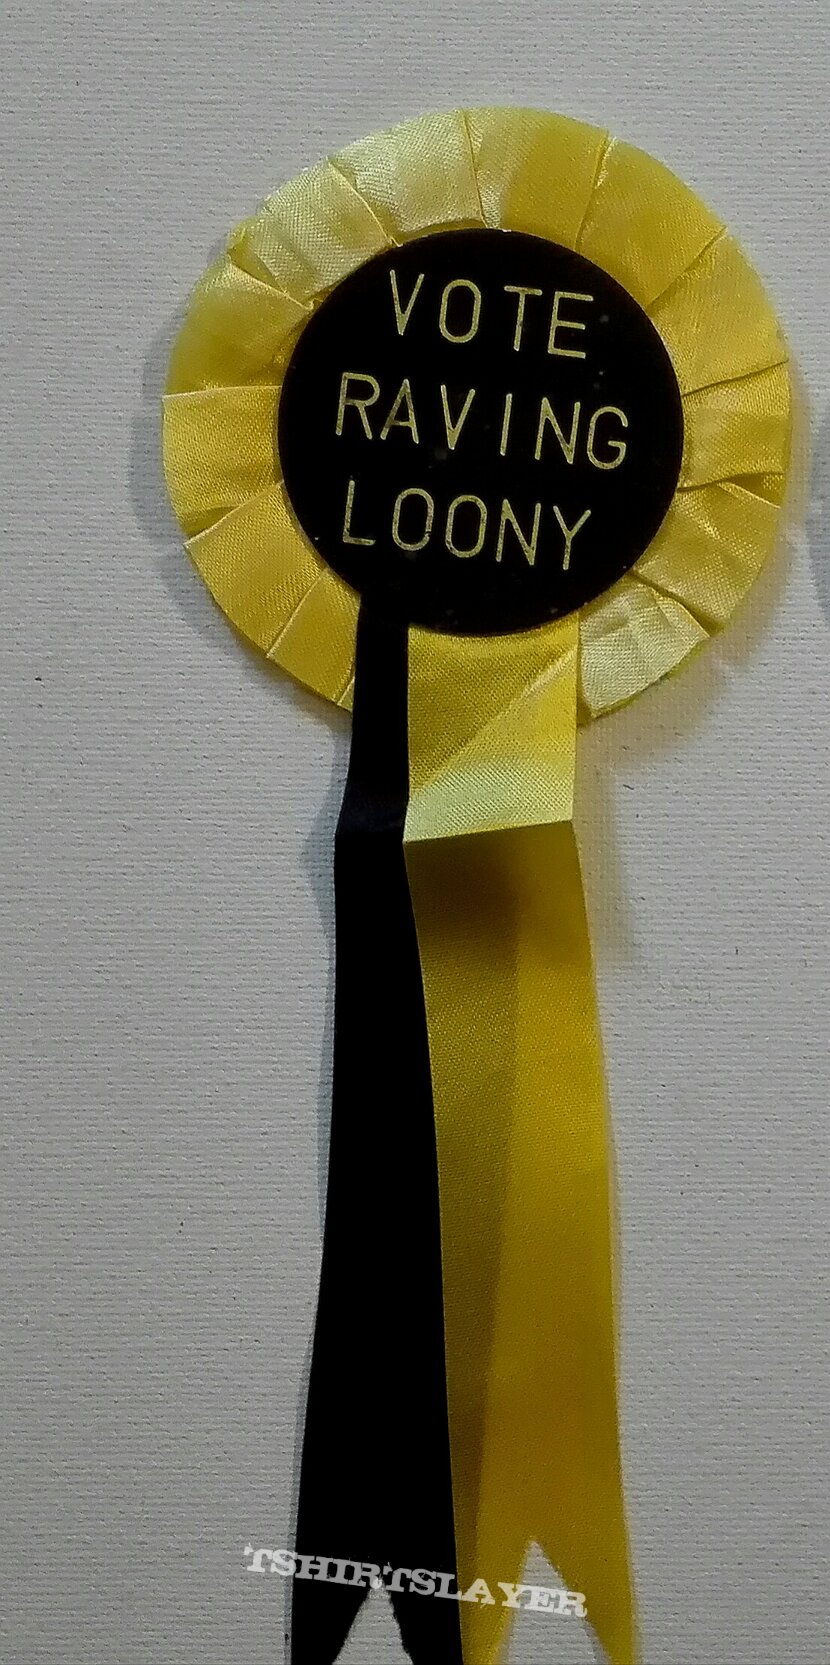 Lord Sutch/ Monster Raving Loony Party campaign rosette